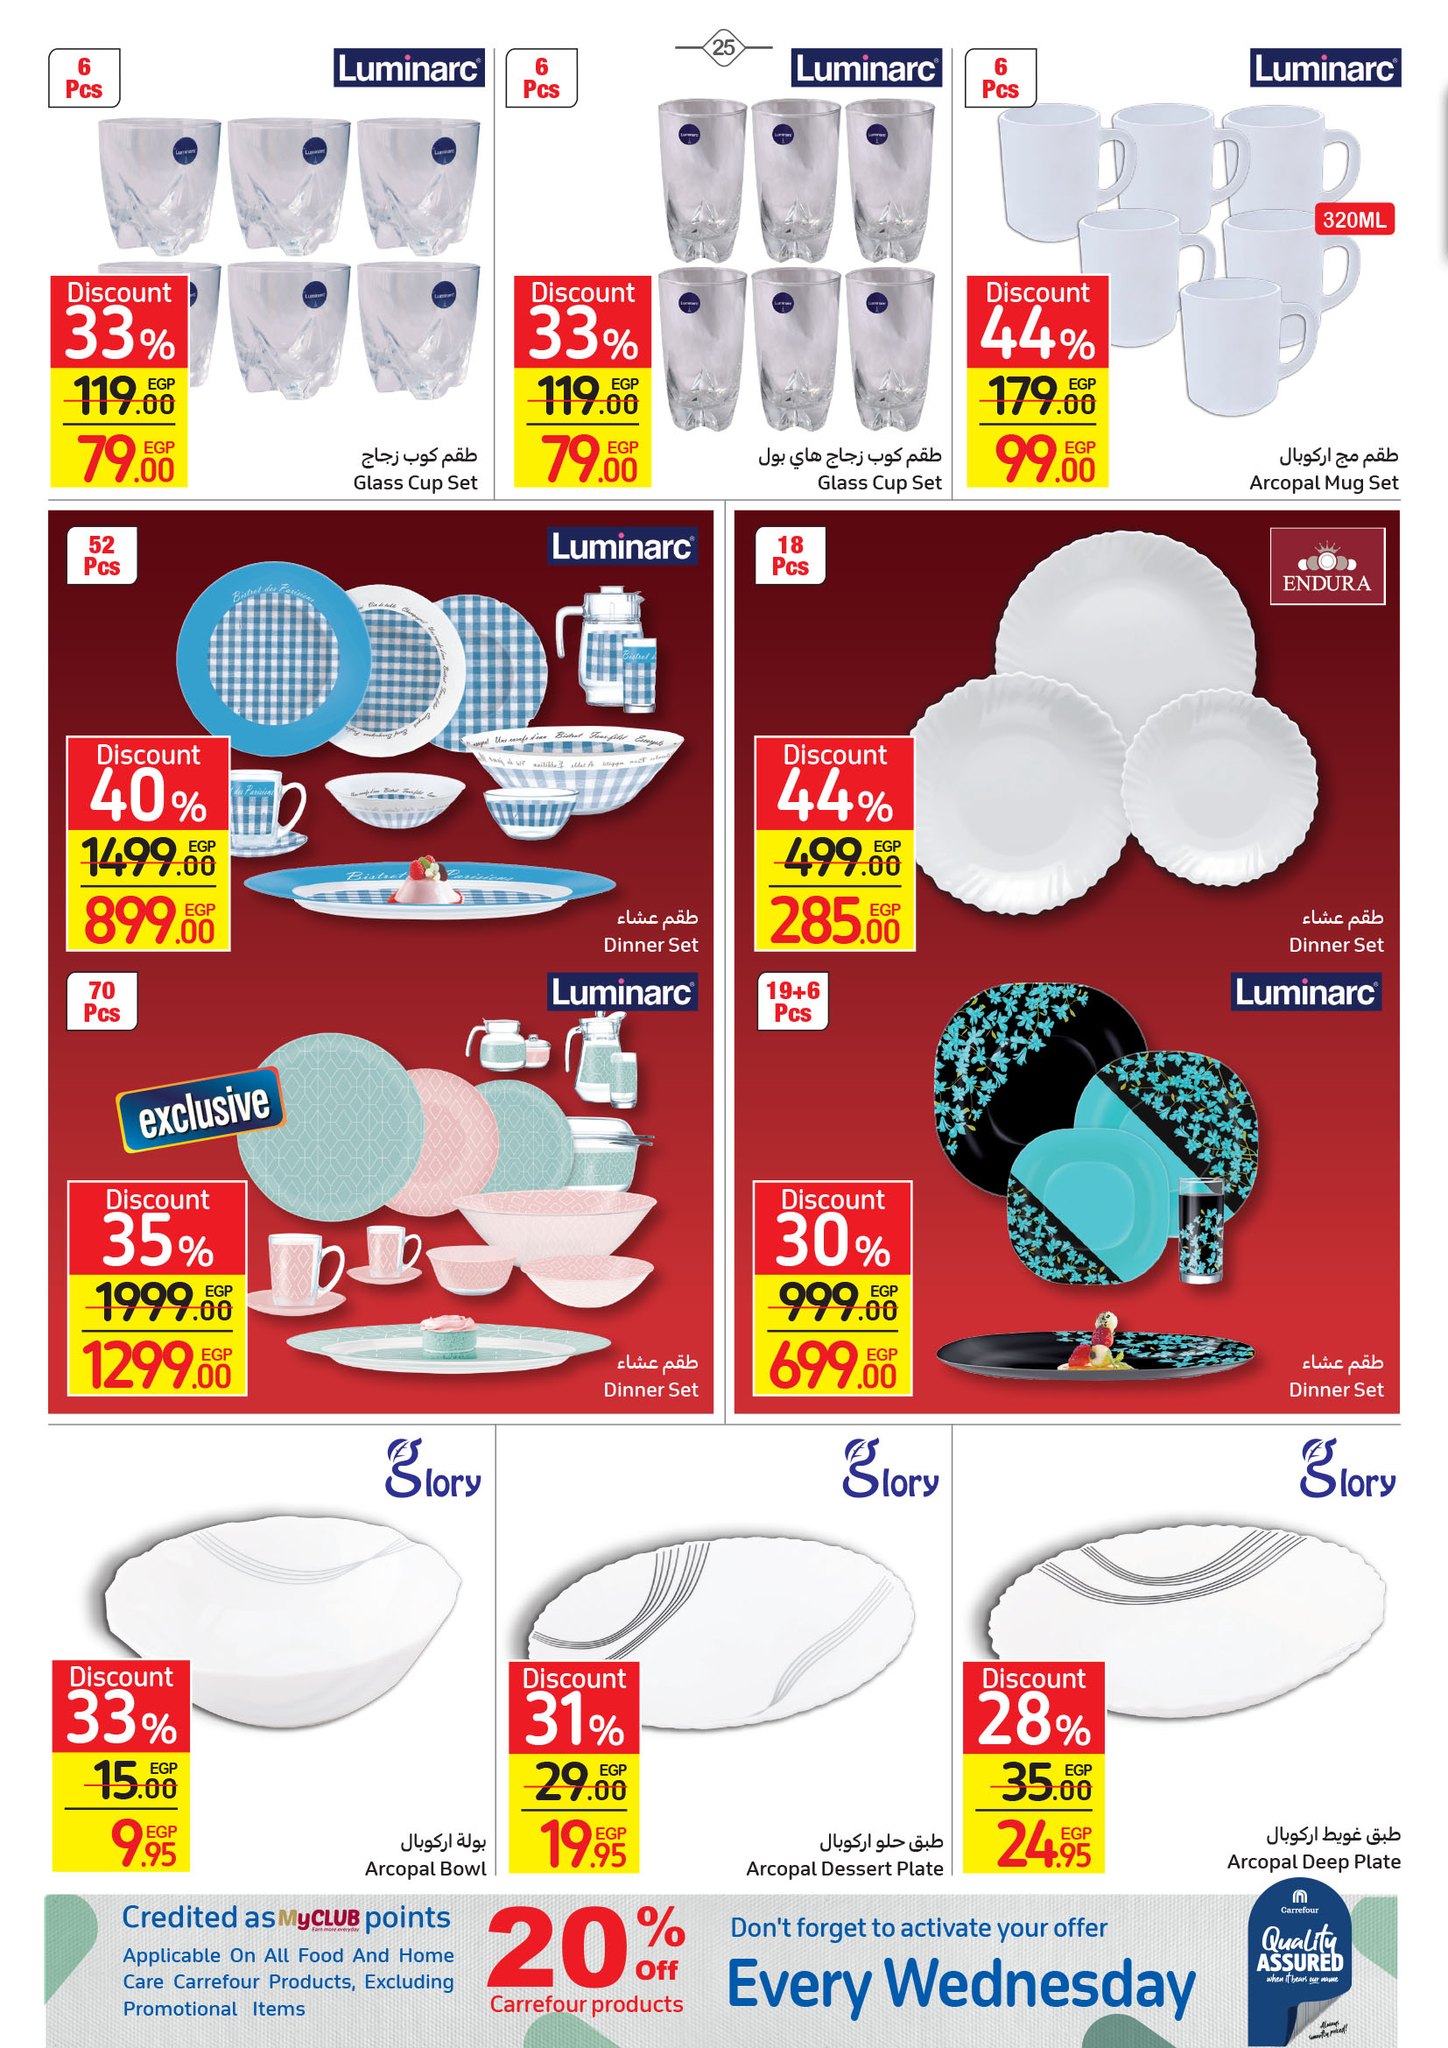 Watch the latest Carrefour half price offers "Last Chance Offer" until December 4 25